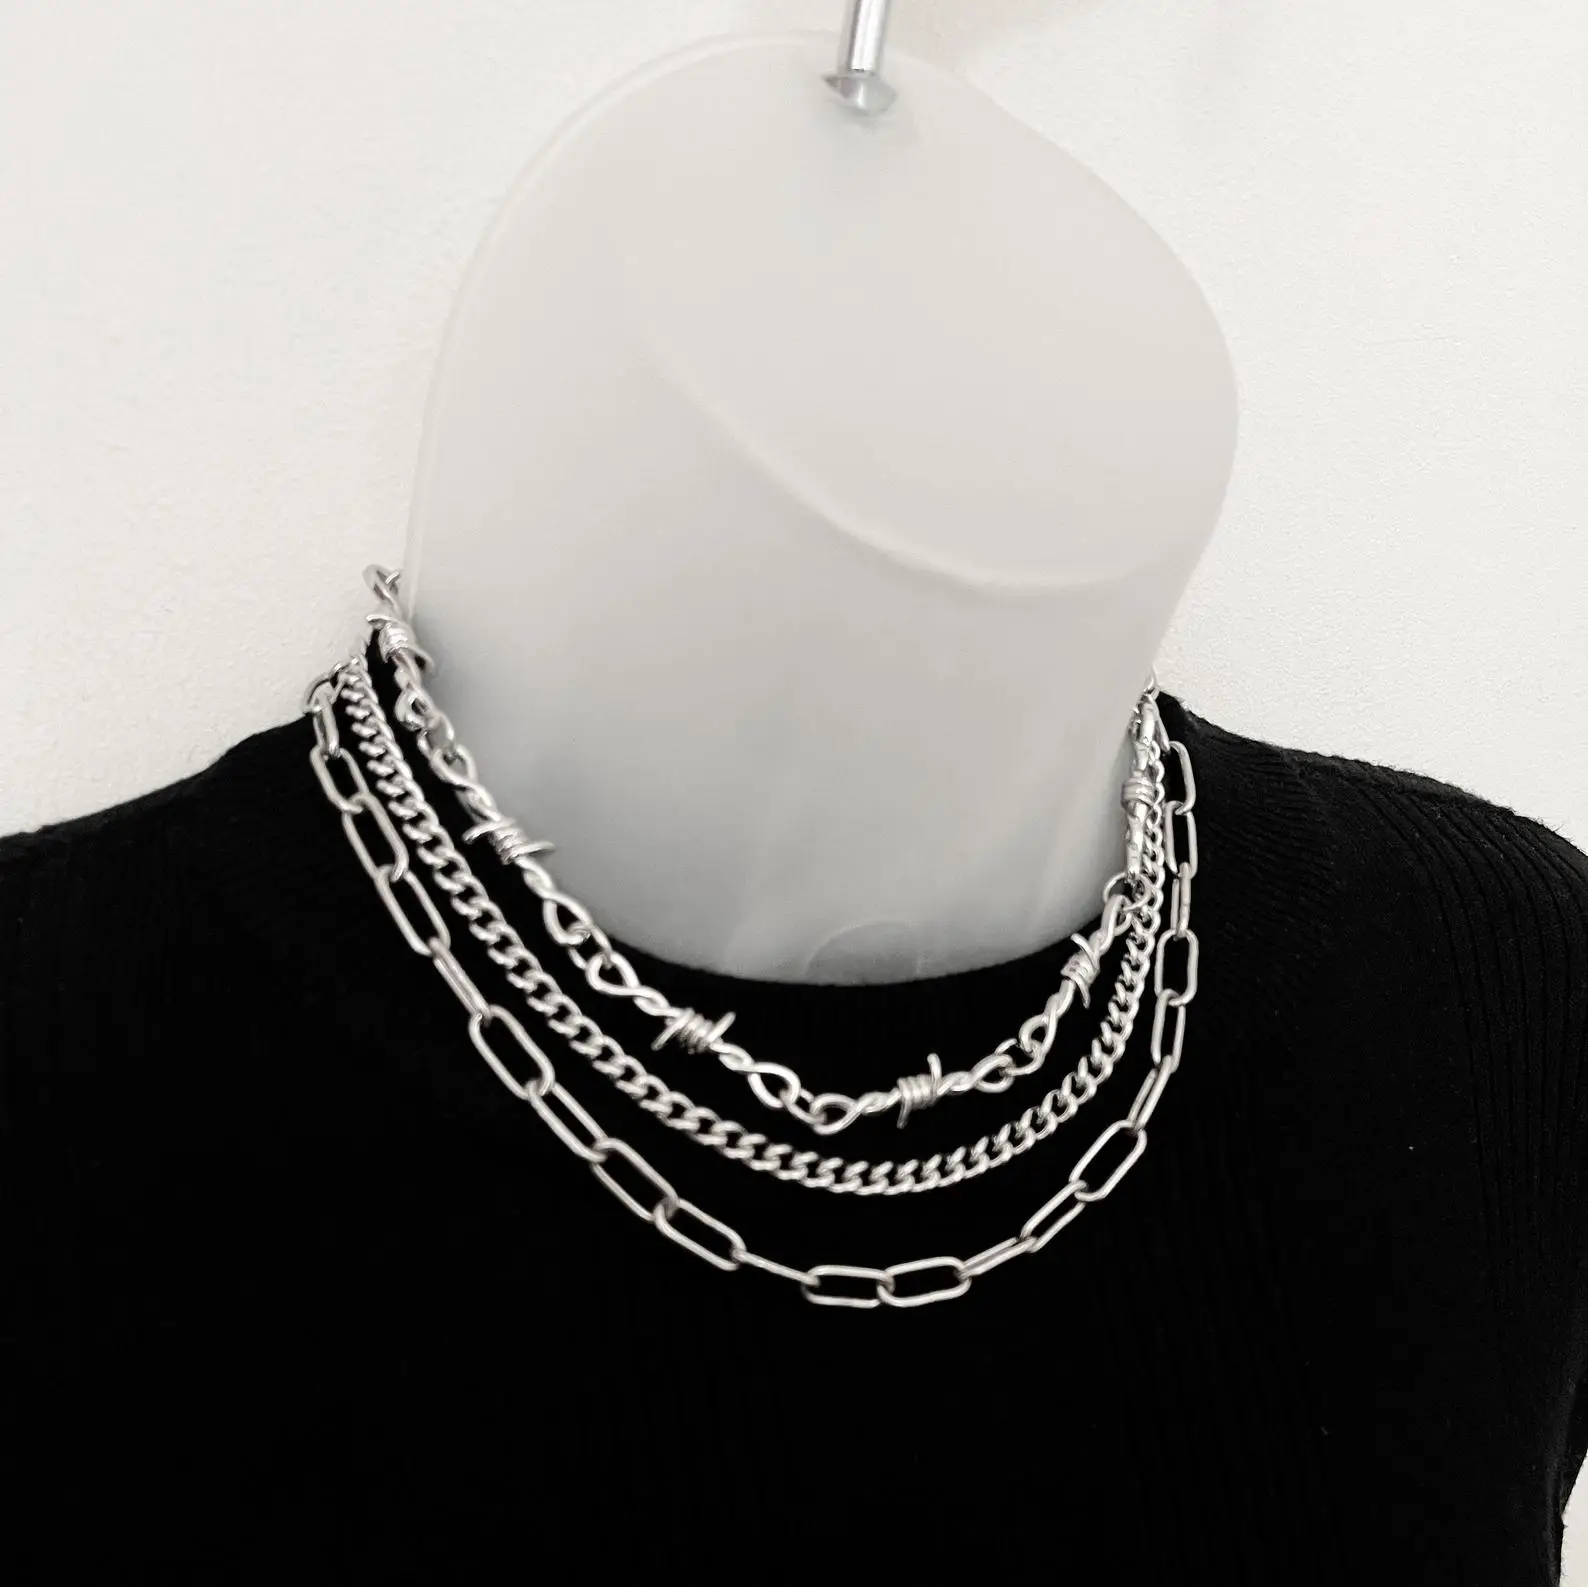 silver link necklace silver barbed wire necklace barbed wire necklace barbed wire necklace curb chain